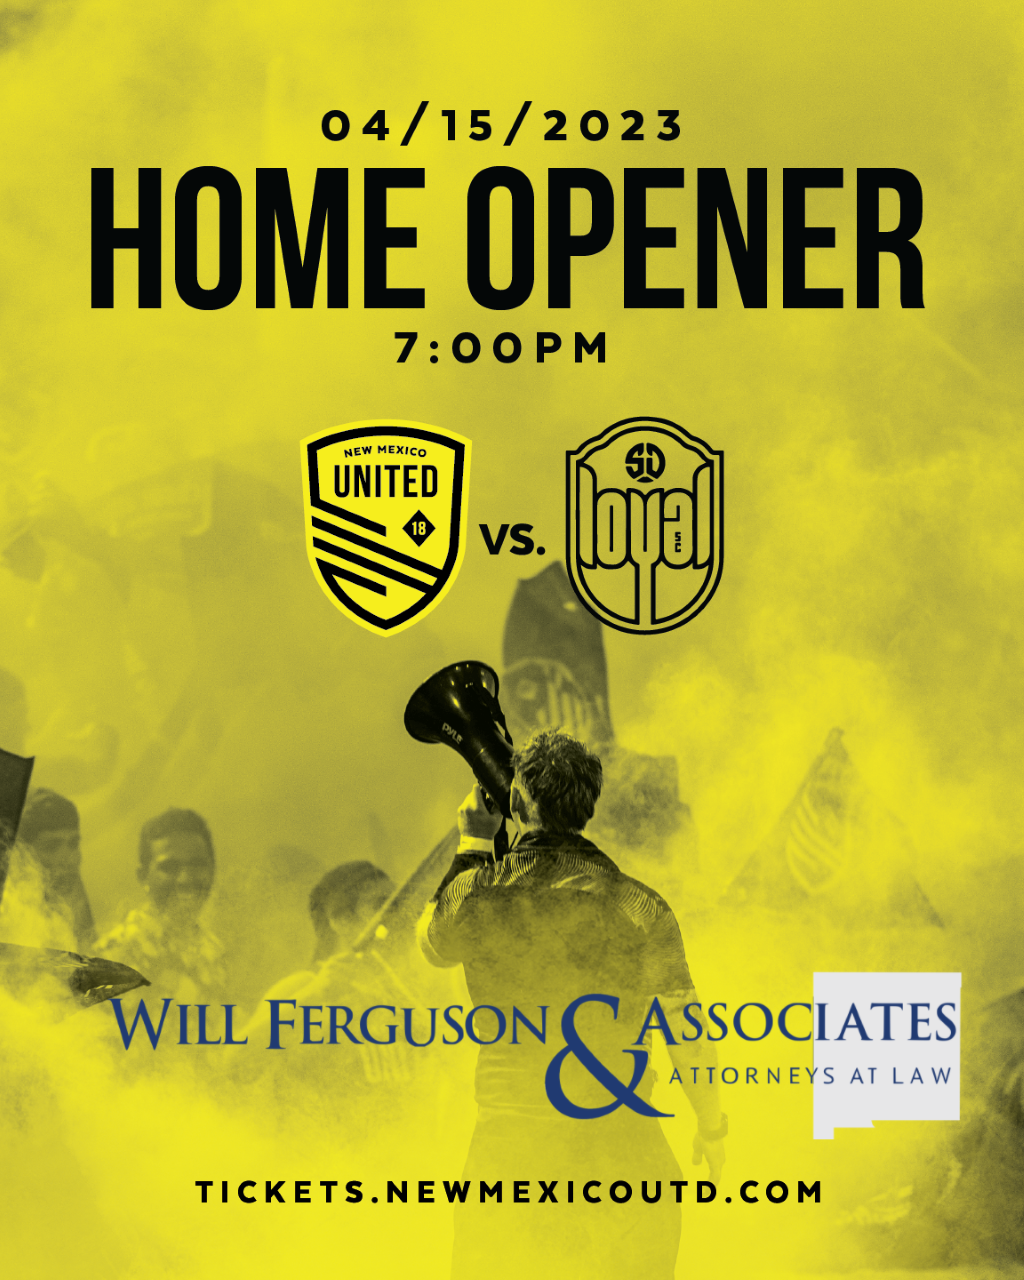 Will Ferguson & Associates Becomes the Newest Corporate Sponsor of the Yellow Card for New Mexico United, Albuquerque’s Professional United Soccer League Team